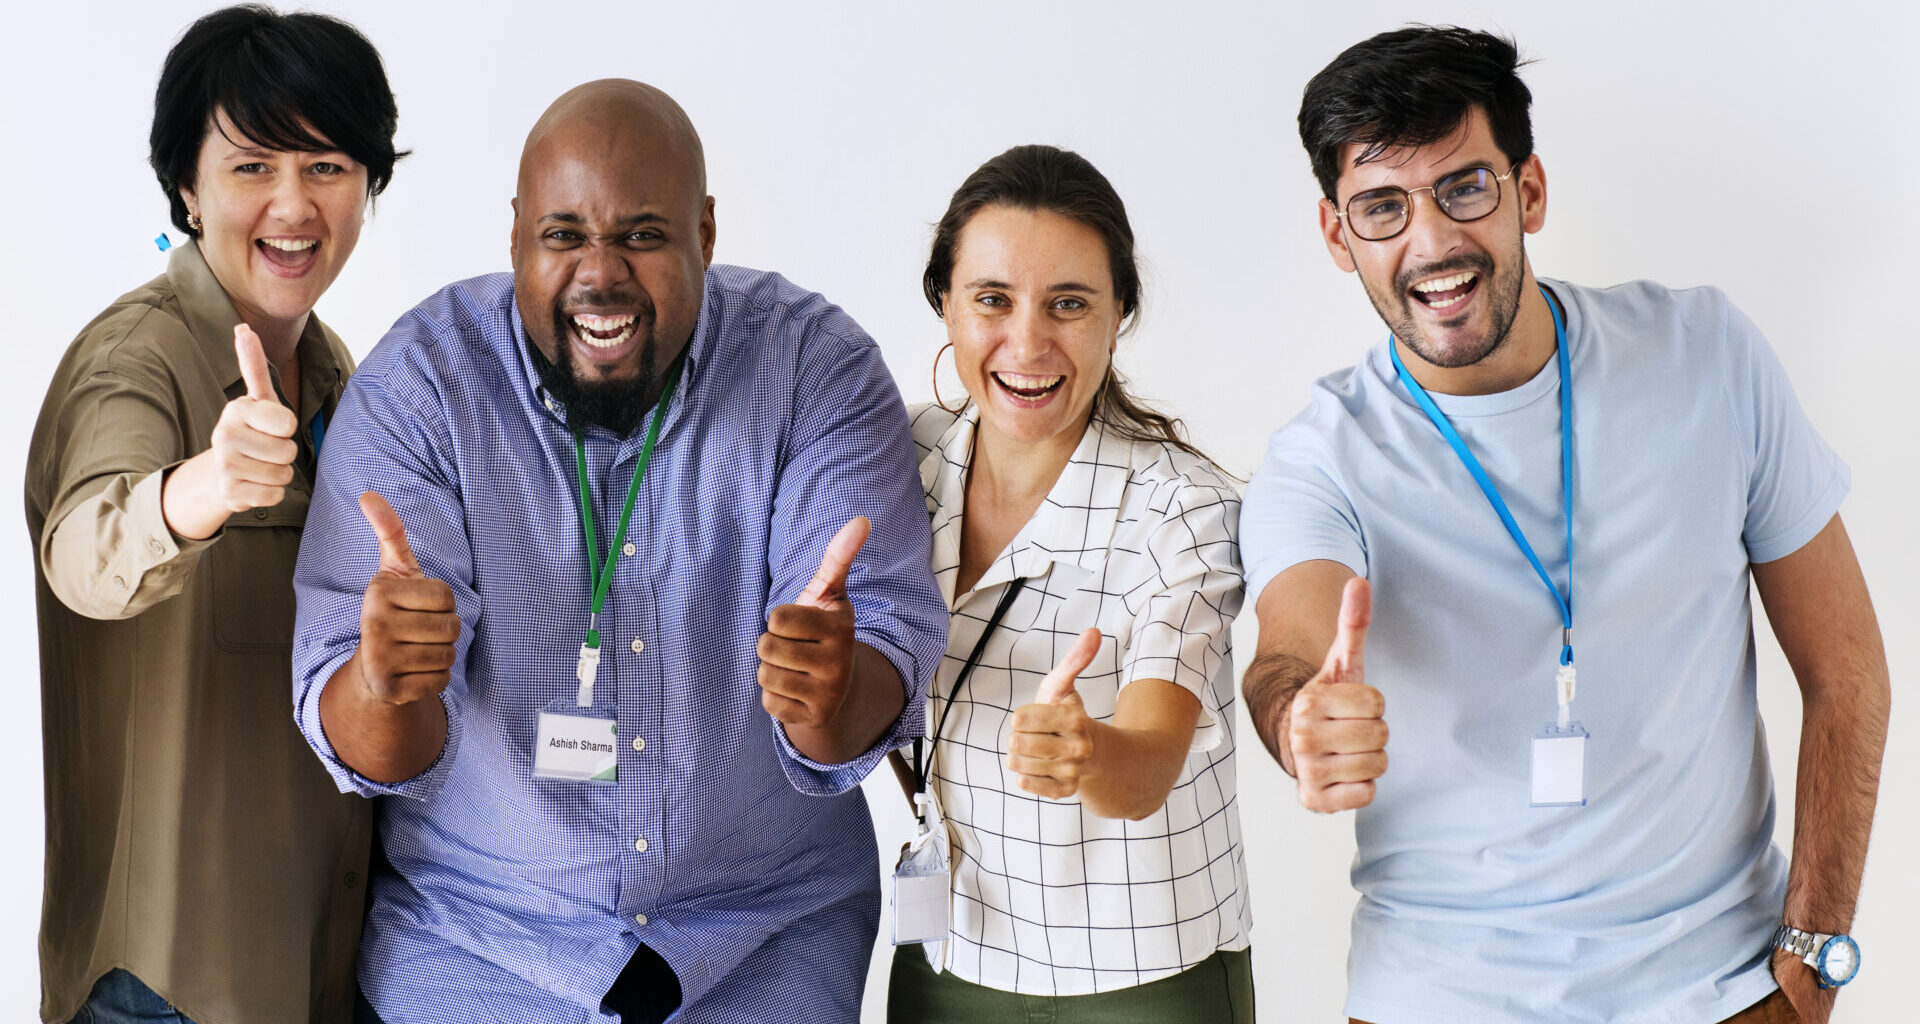 Four employees smiling and showing thumbs up appreciation